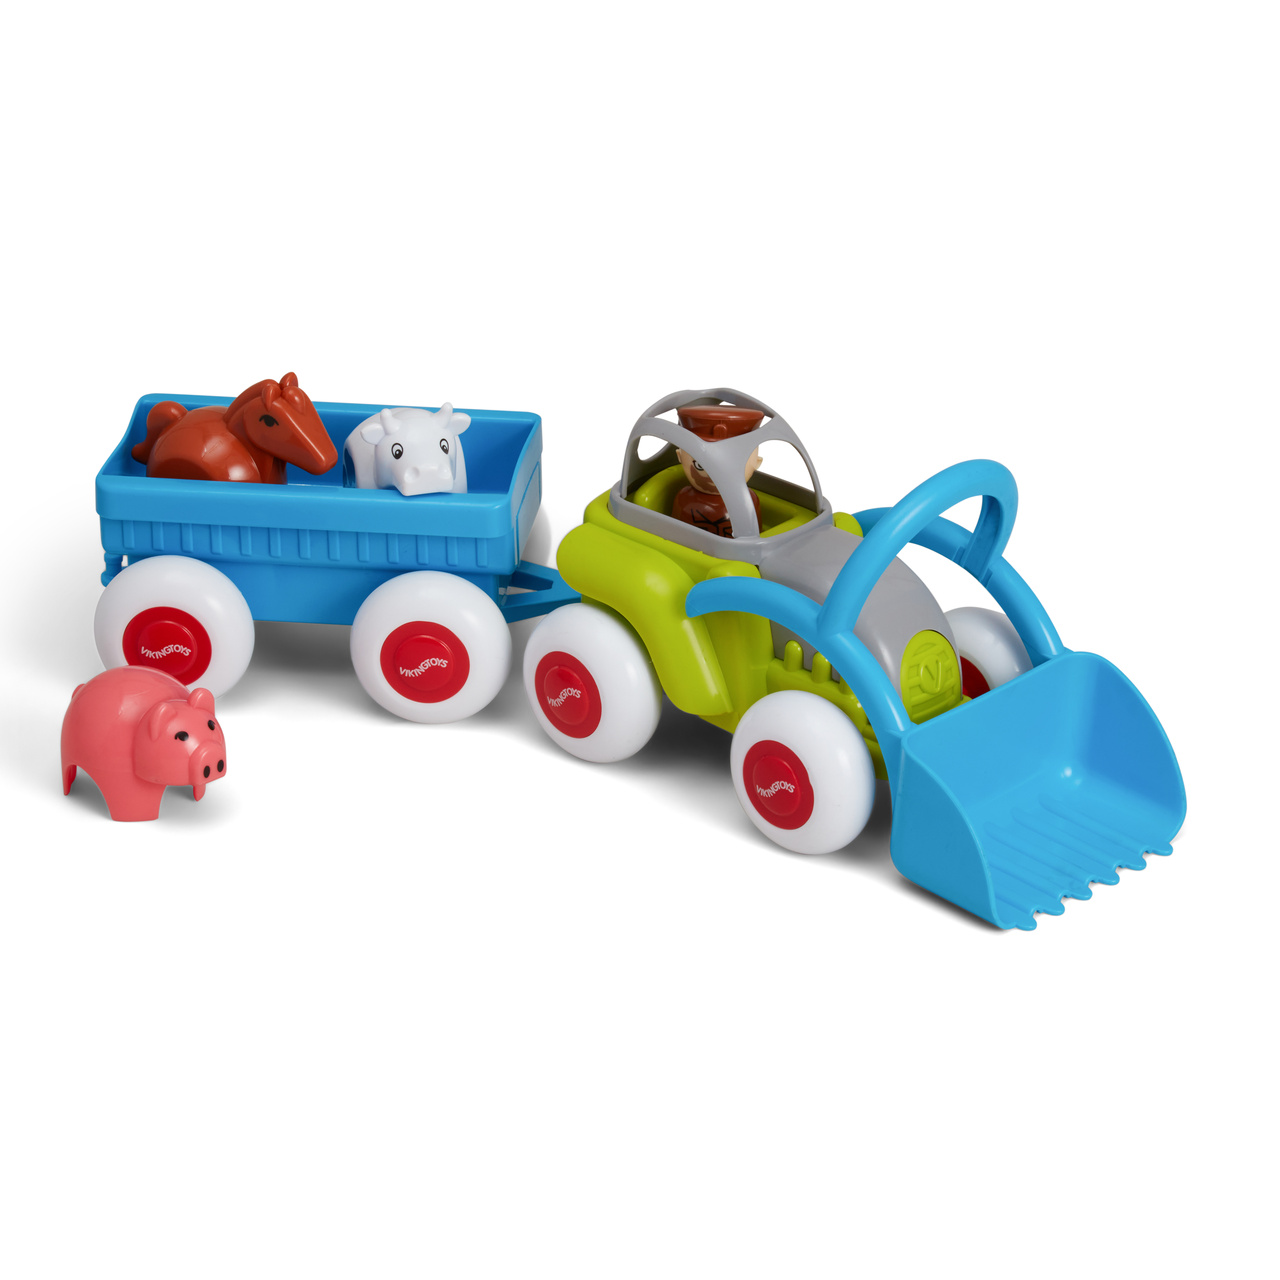 Tractor with trailer and animals